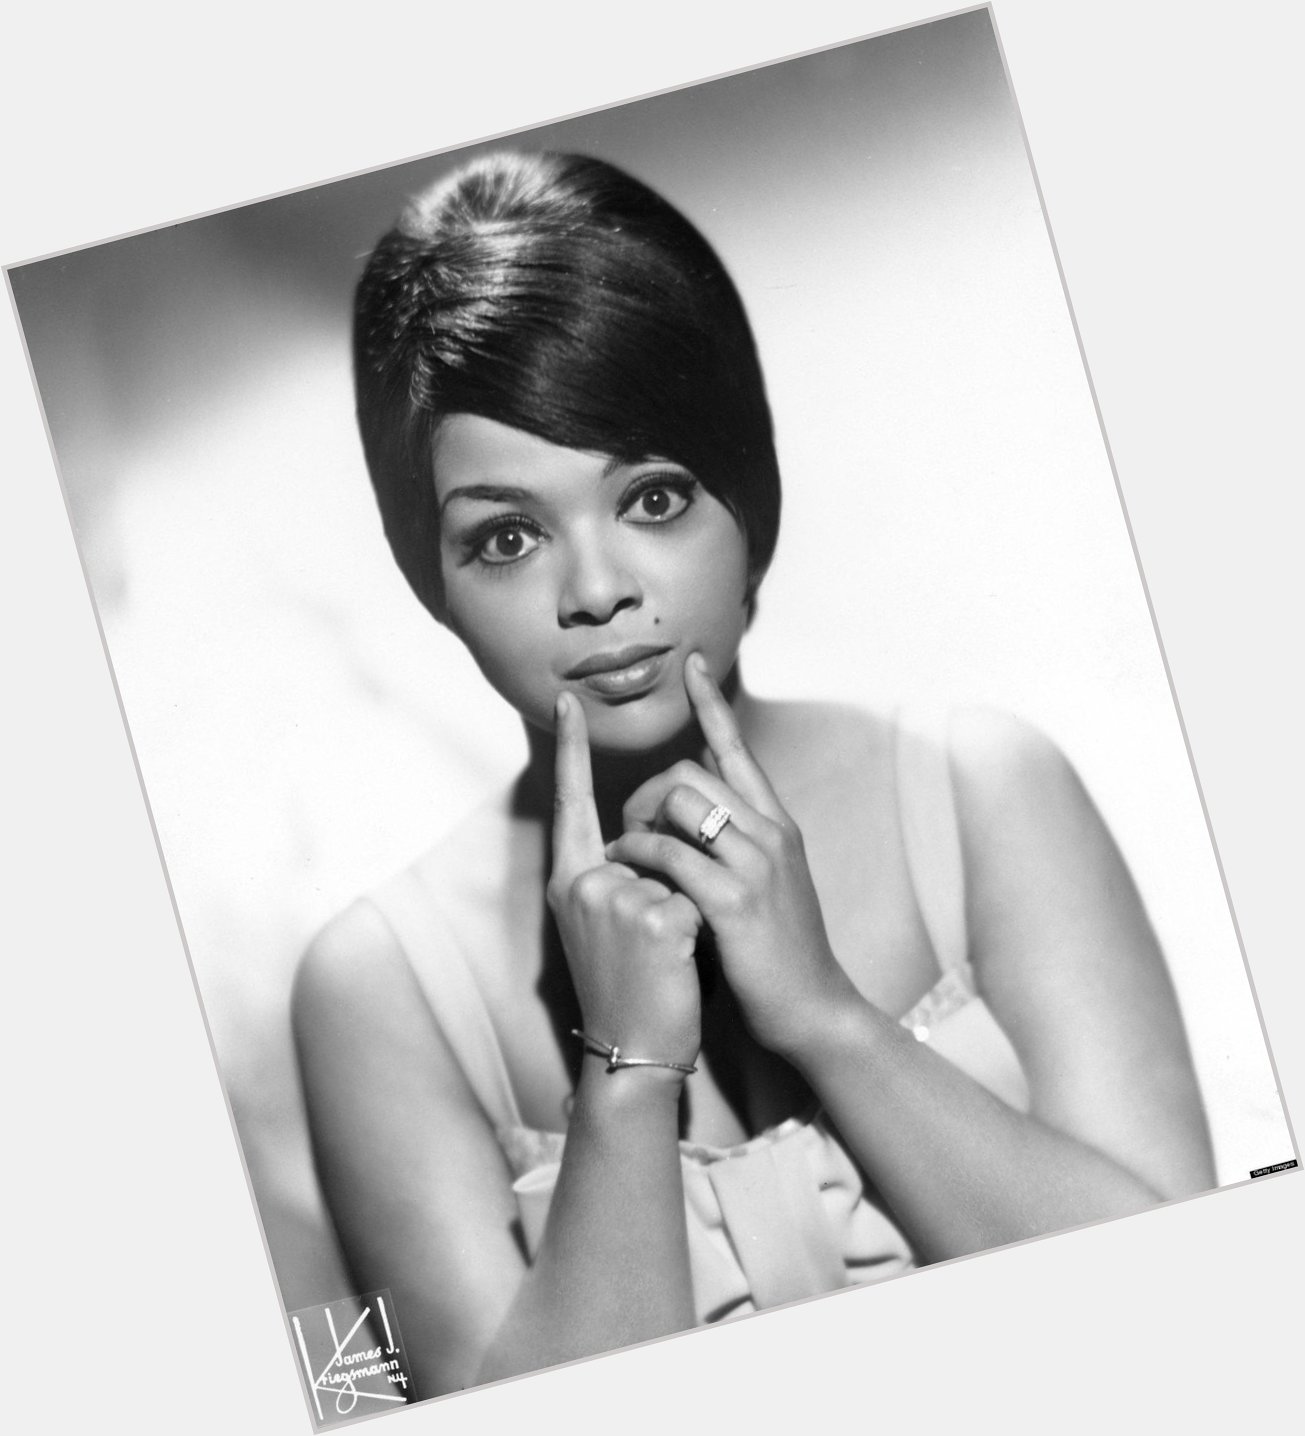 Happy Birthday to Tammi Terrell, who would have turned 70 today! 